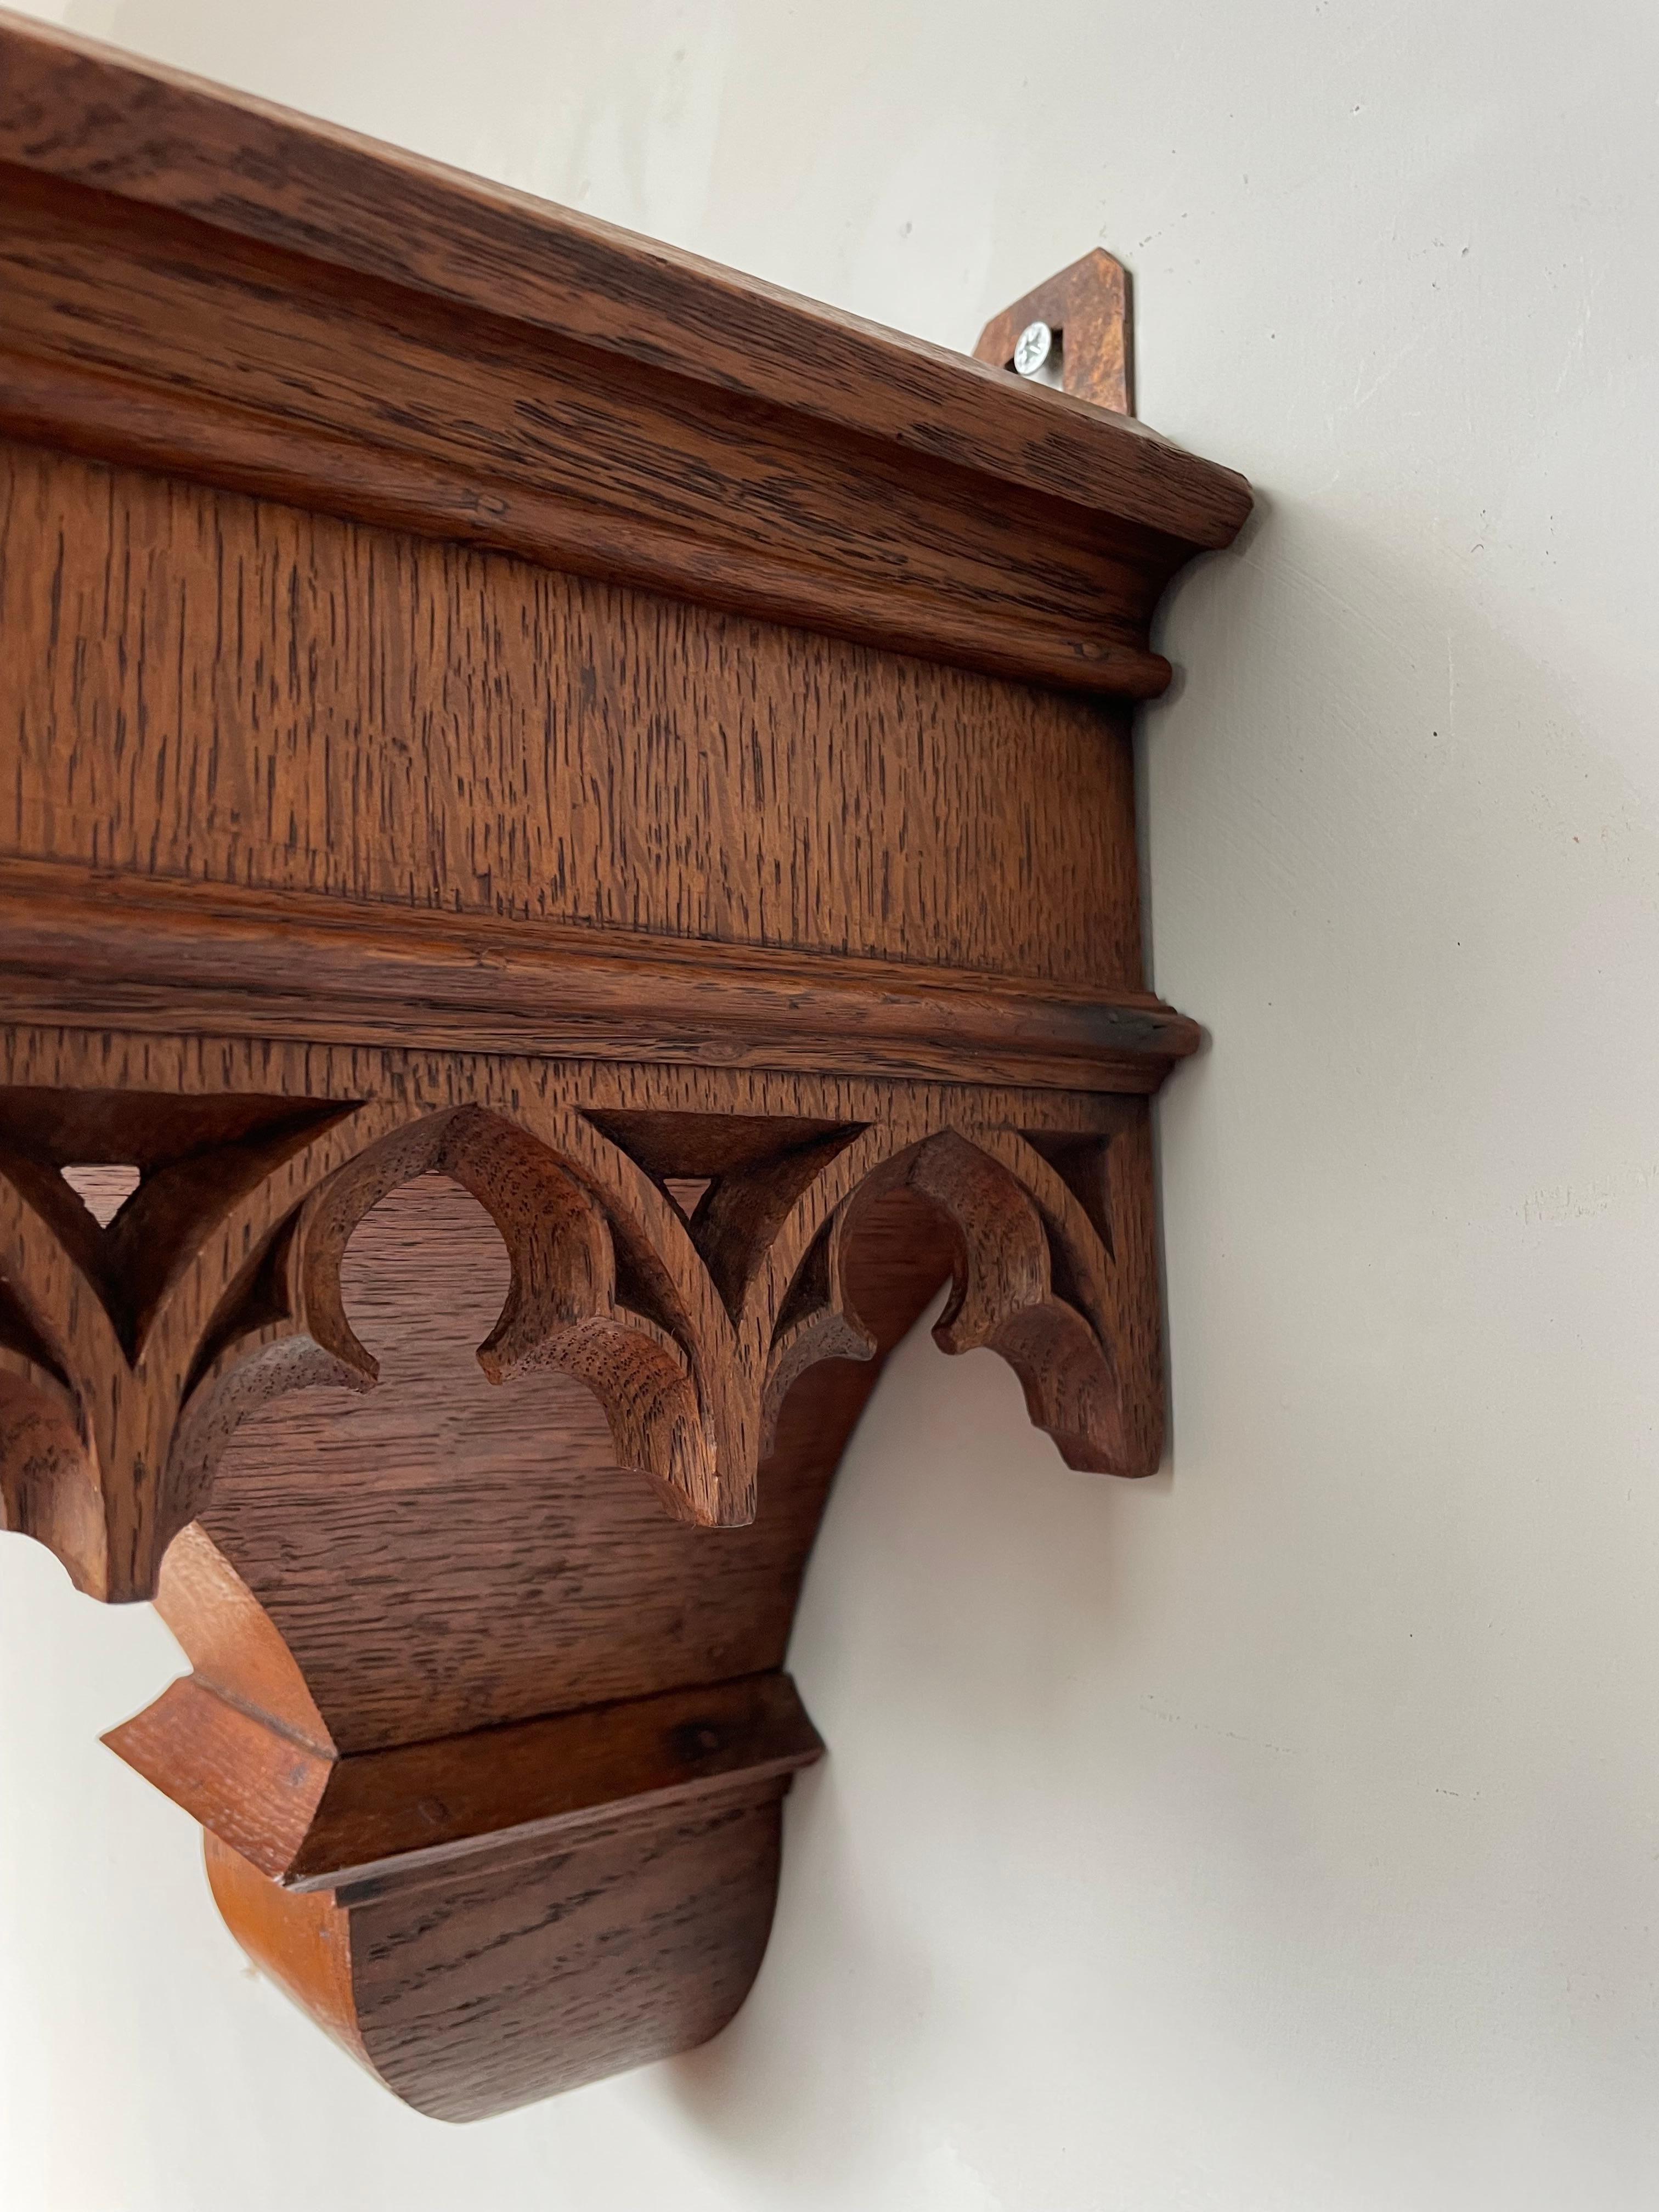 European Antique and Quality Hand Carved Solid Oak Gothic Church Wall Bracket or Shelf For Sale